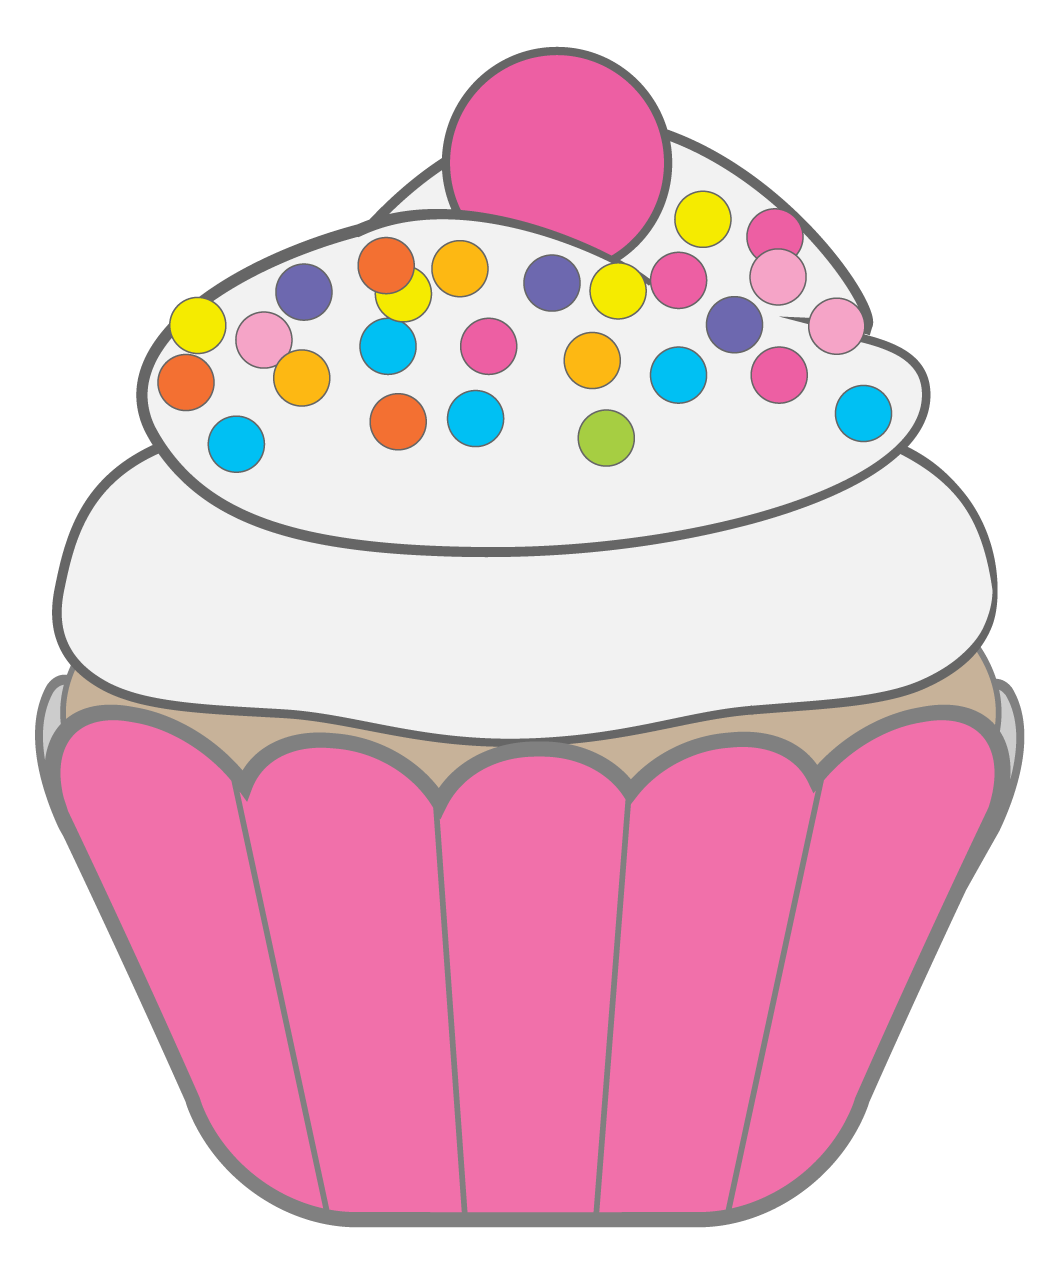 Cupcakes muffins by carol. Clipart cupcake adorable